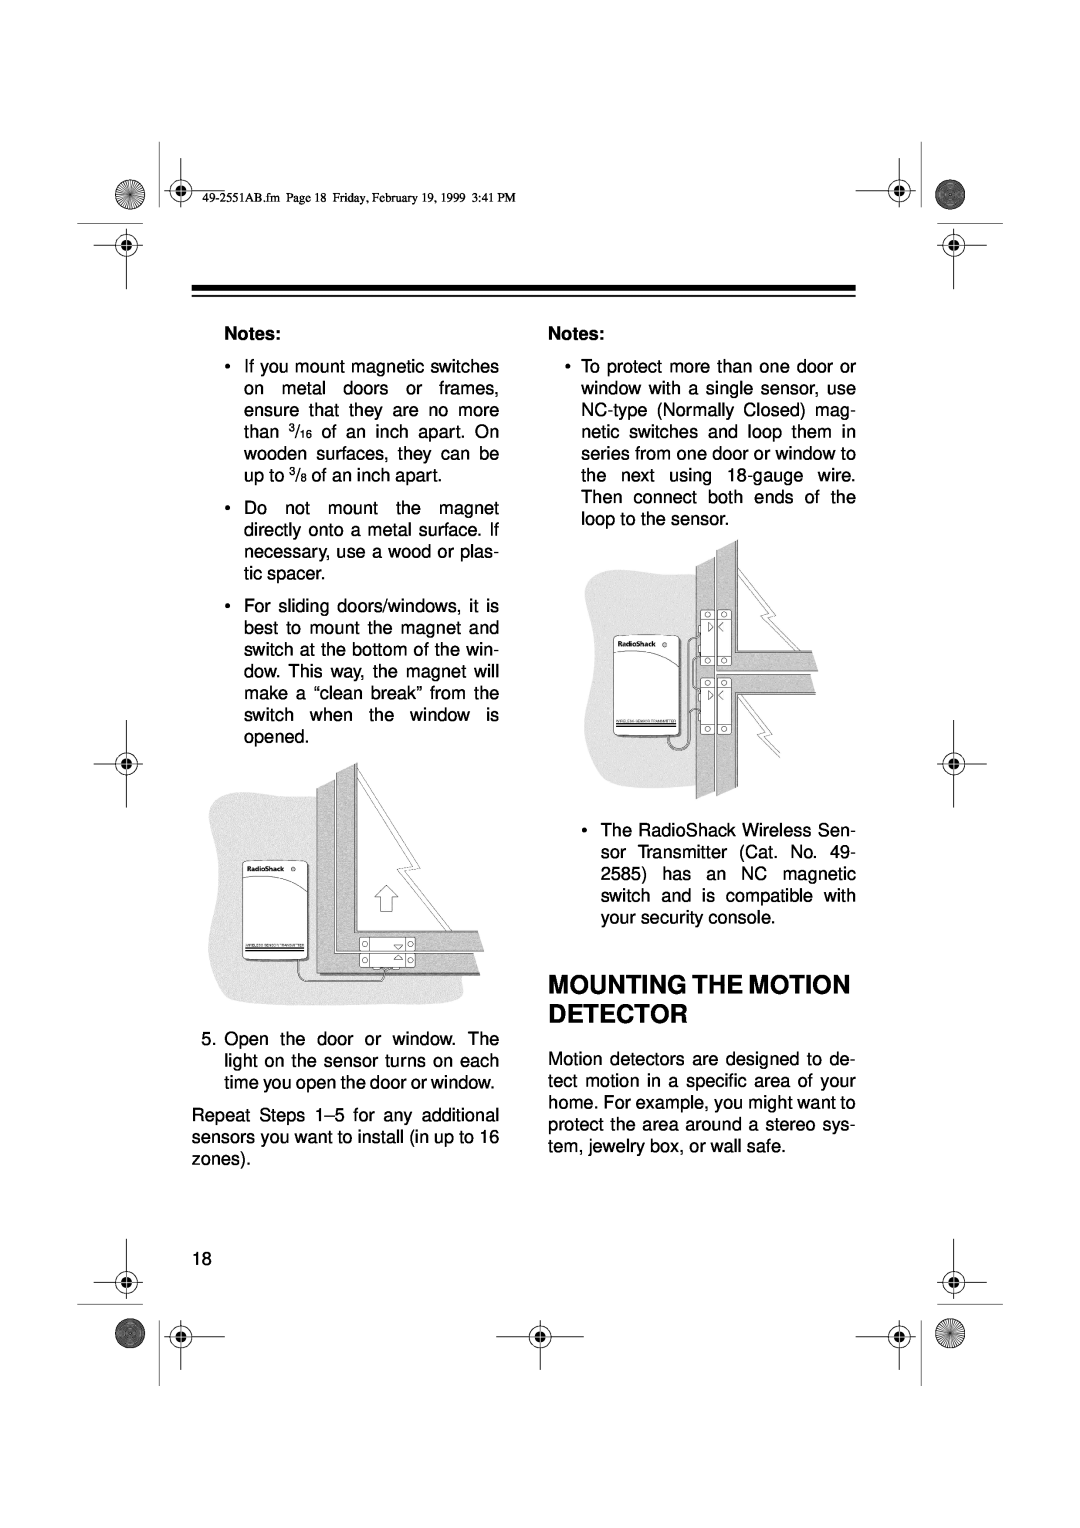 Radio Shack 49-2551A owner manual Mounting The Motion Detector 